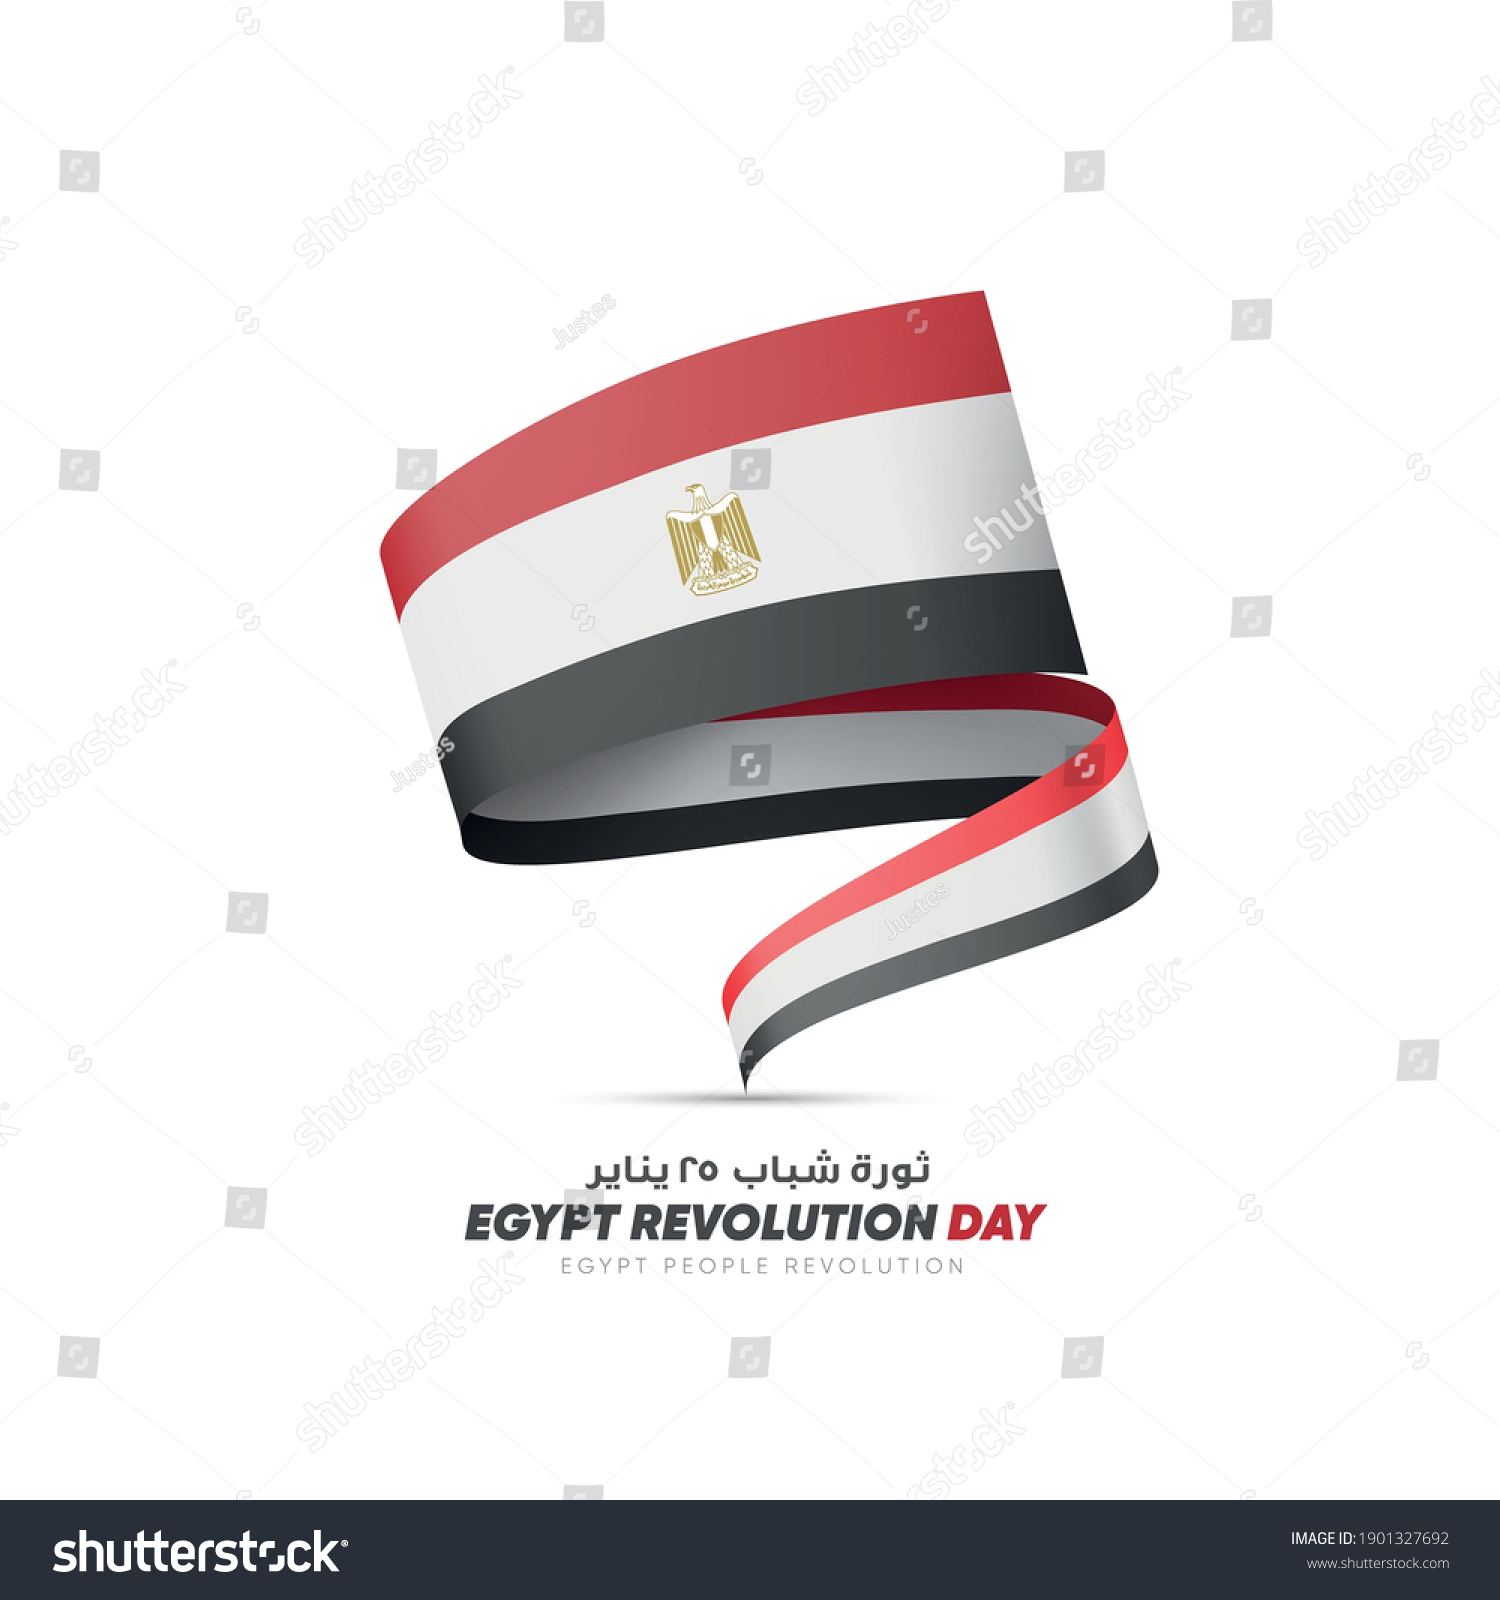 SVG of January 25 revolution design celebration - Arabic calligraphy means ( The revolution of the people of Egypt ) Egypt national day with the flag of Egypt  svg